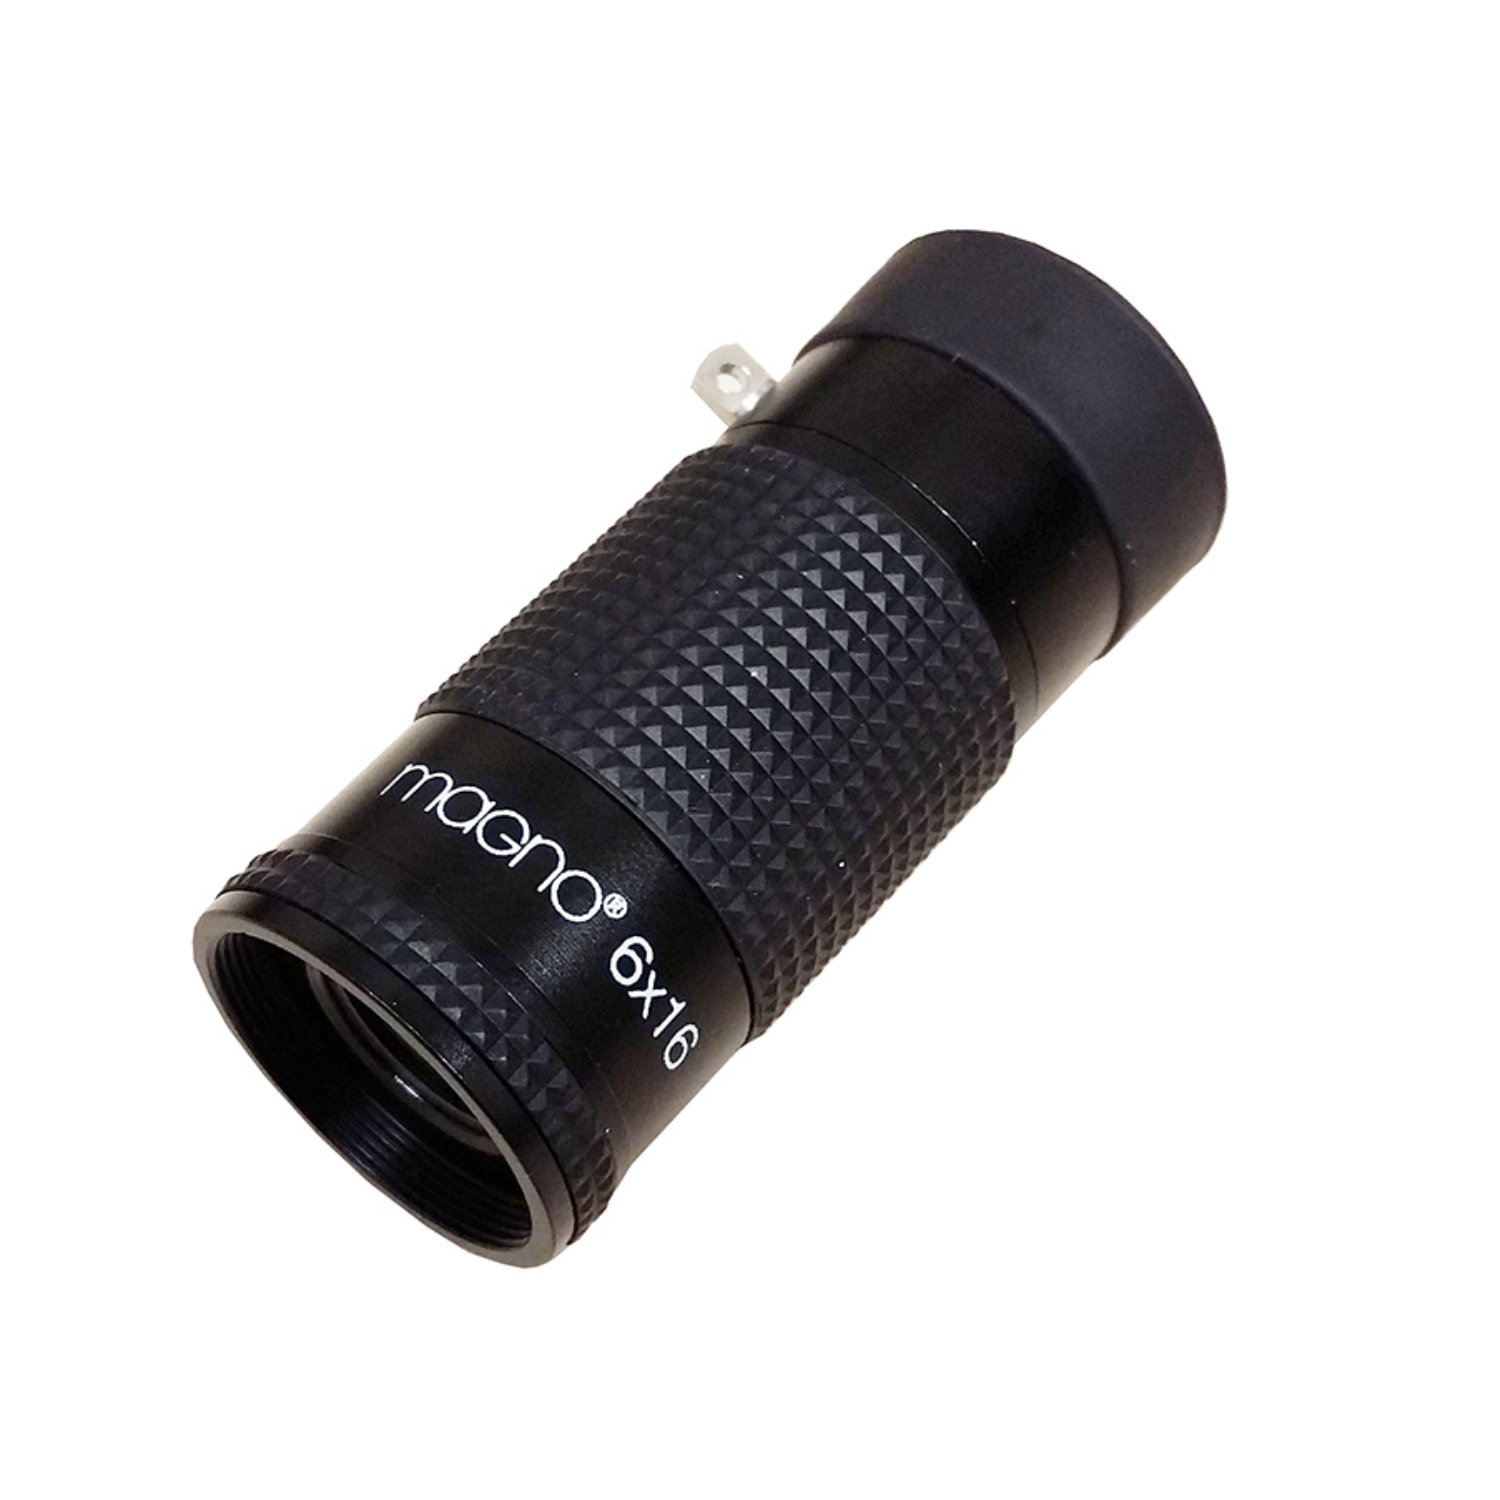 Image of the Magno 6x16mm Monocular from Eschenbach.